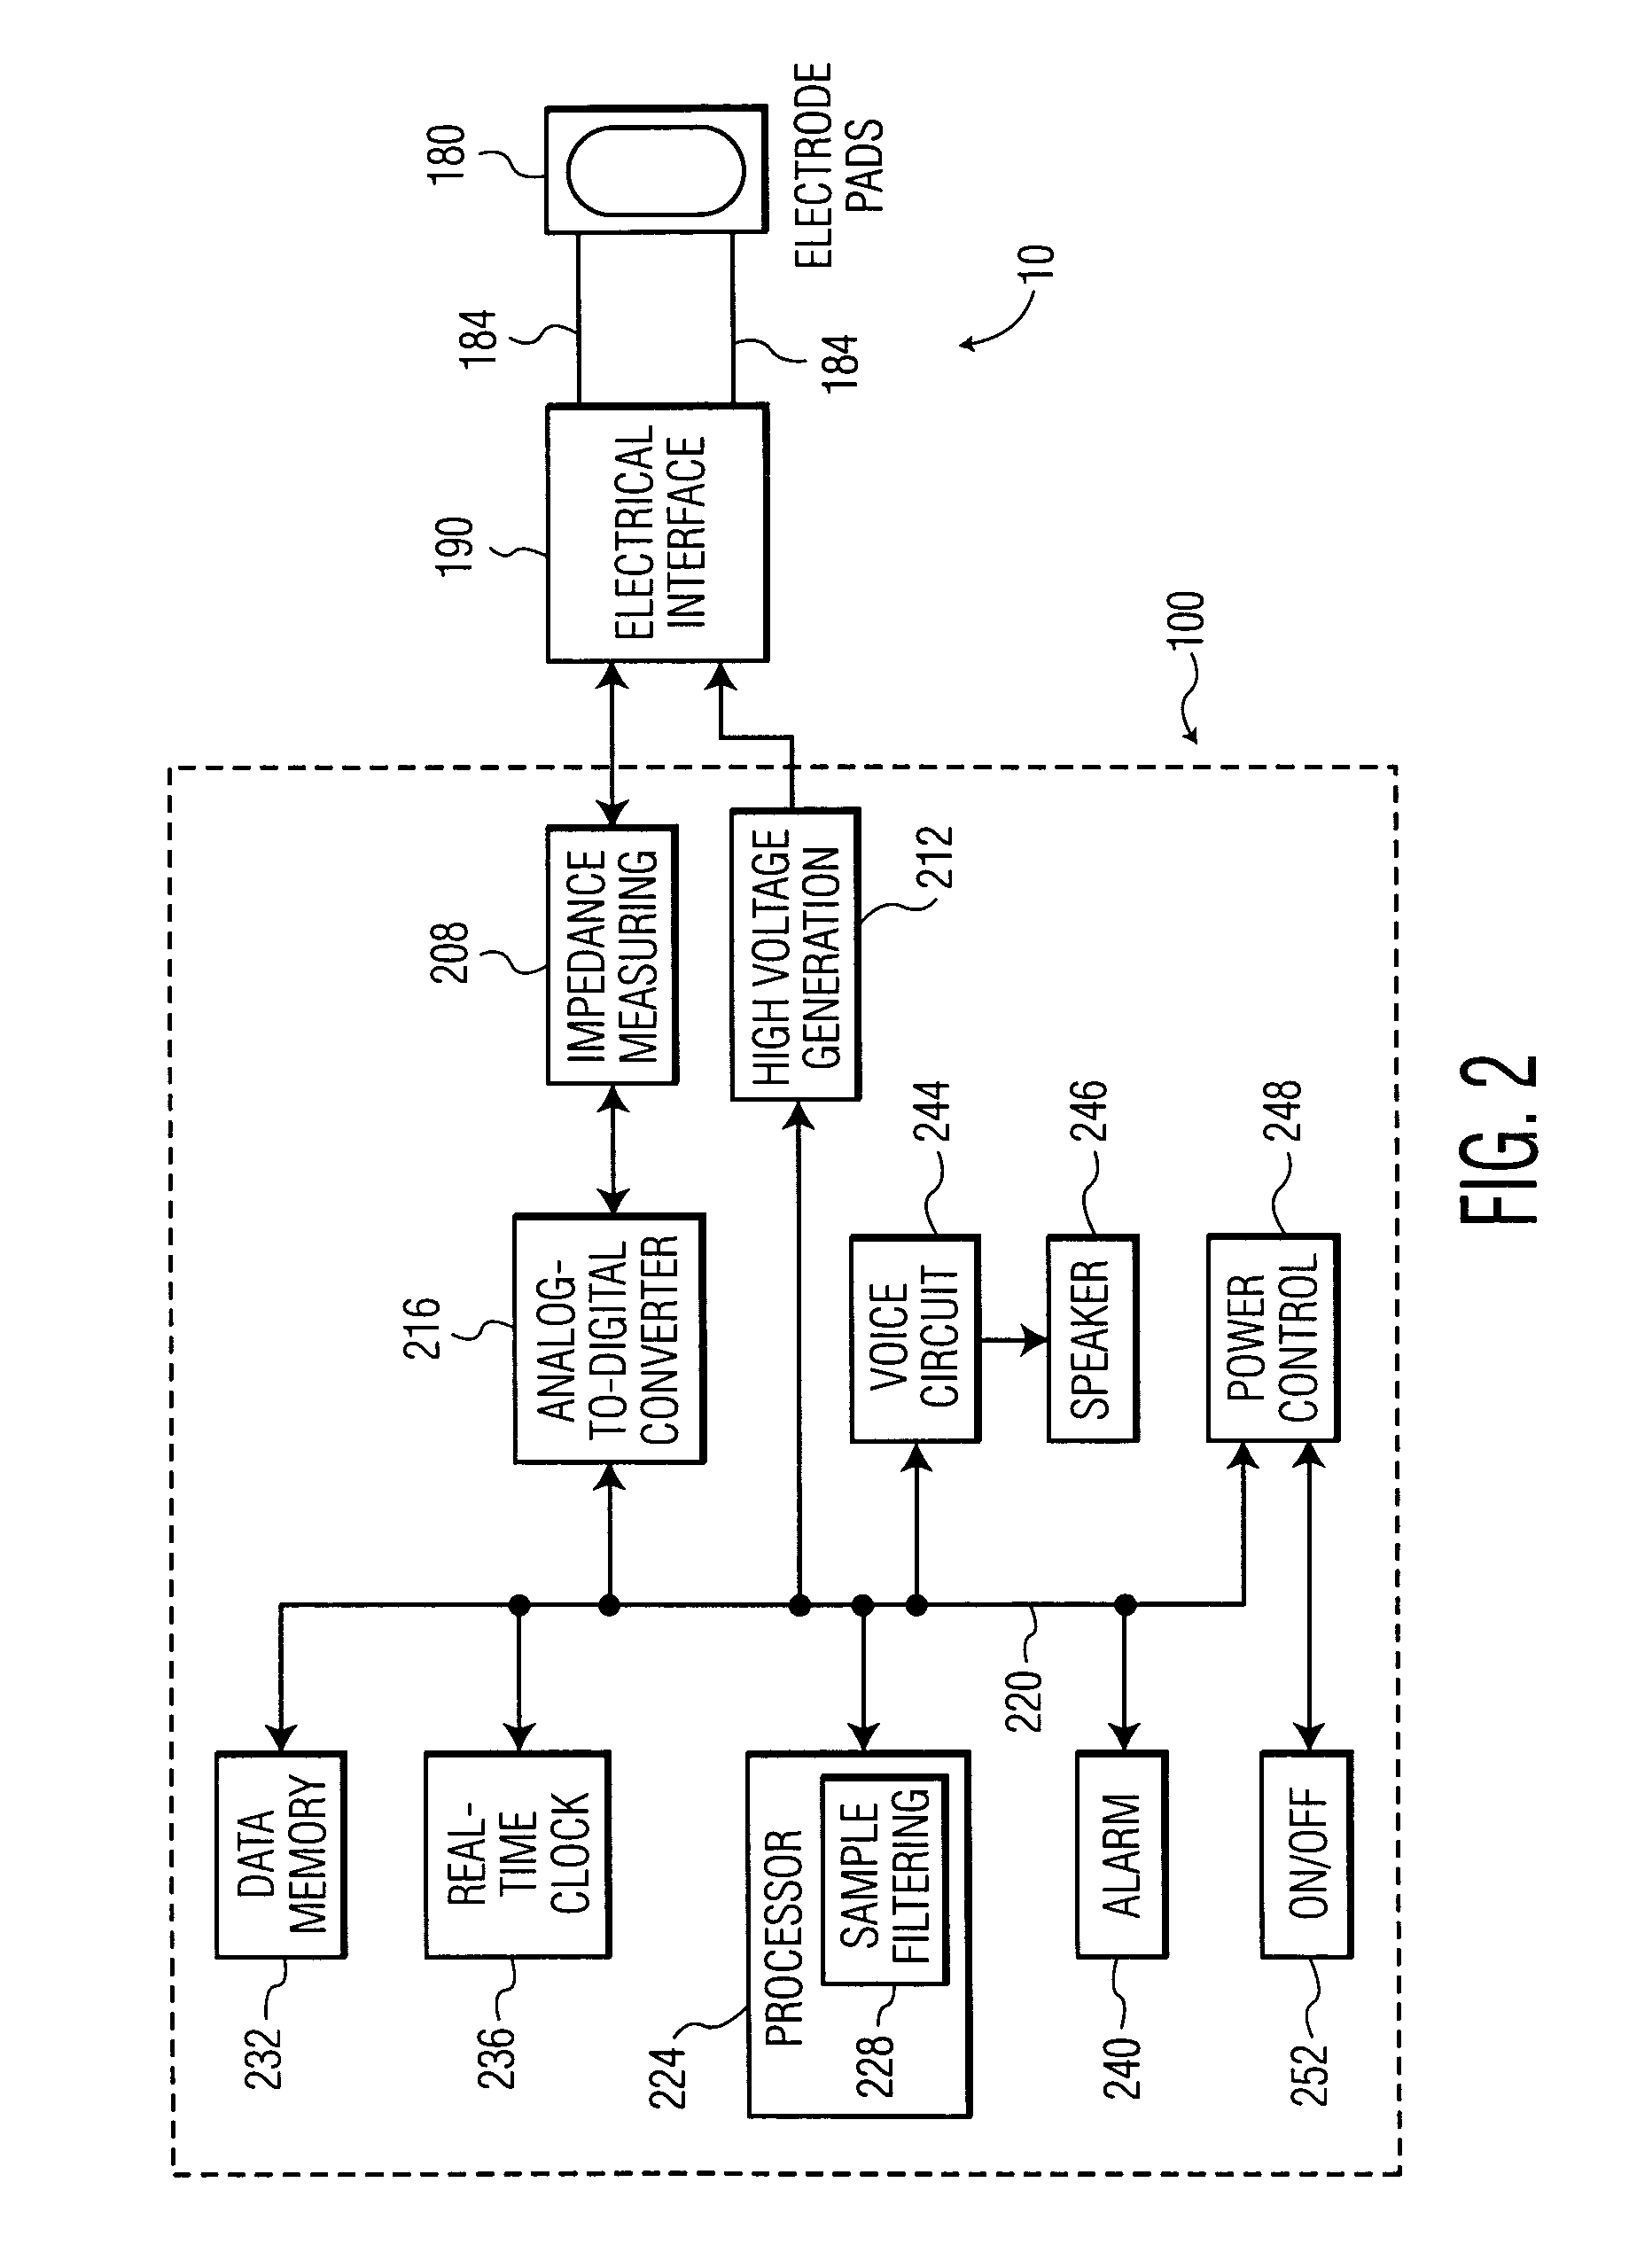 Method of detecting when electrode pads have been handled or removed from their package